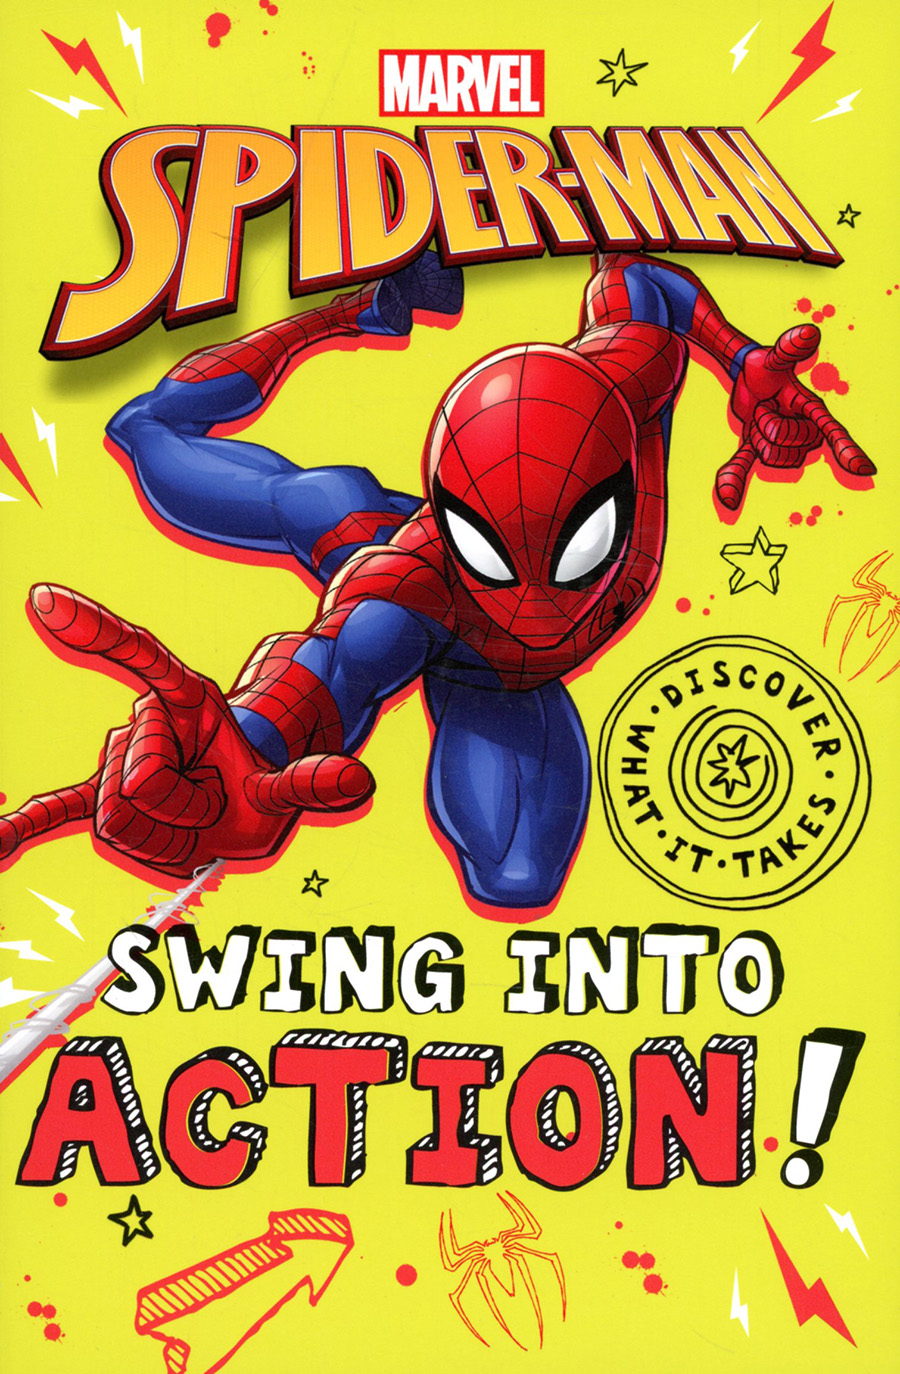 Marvel Spider-Man Swing Into Action TP